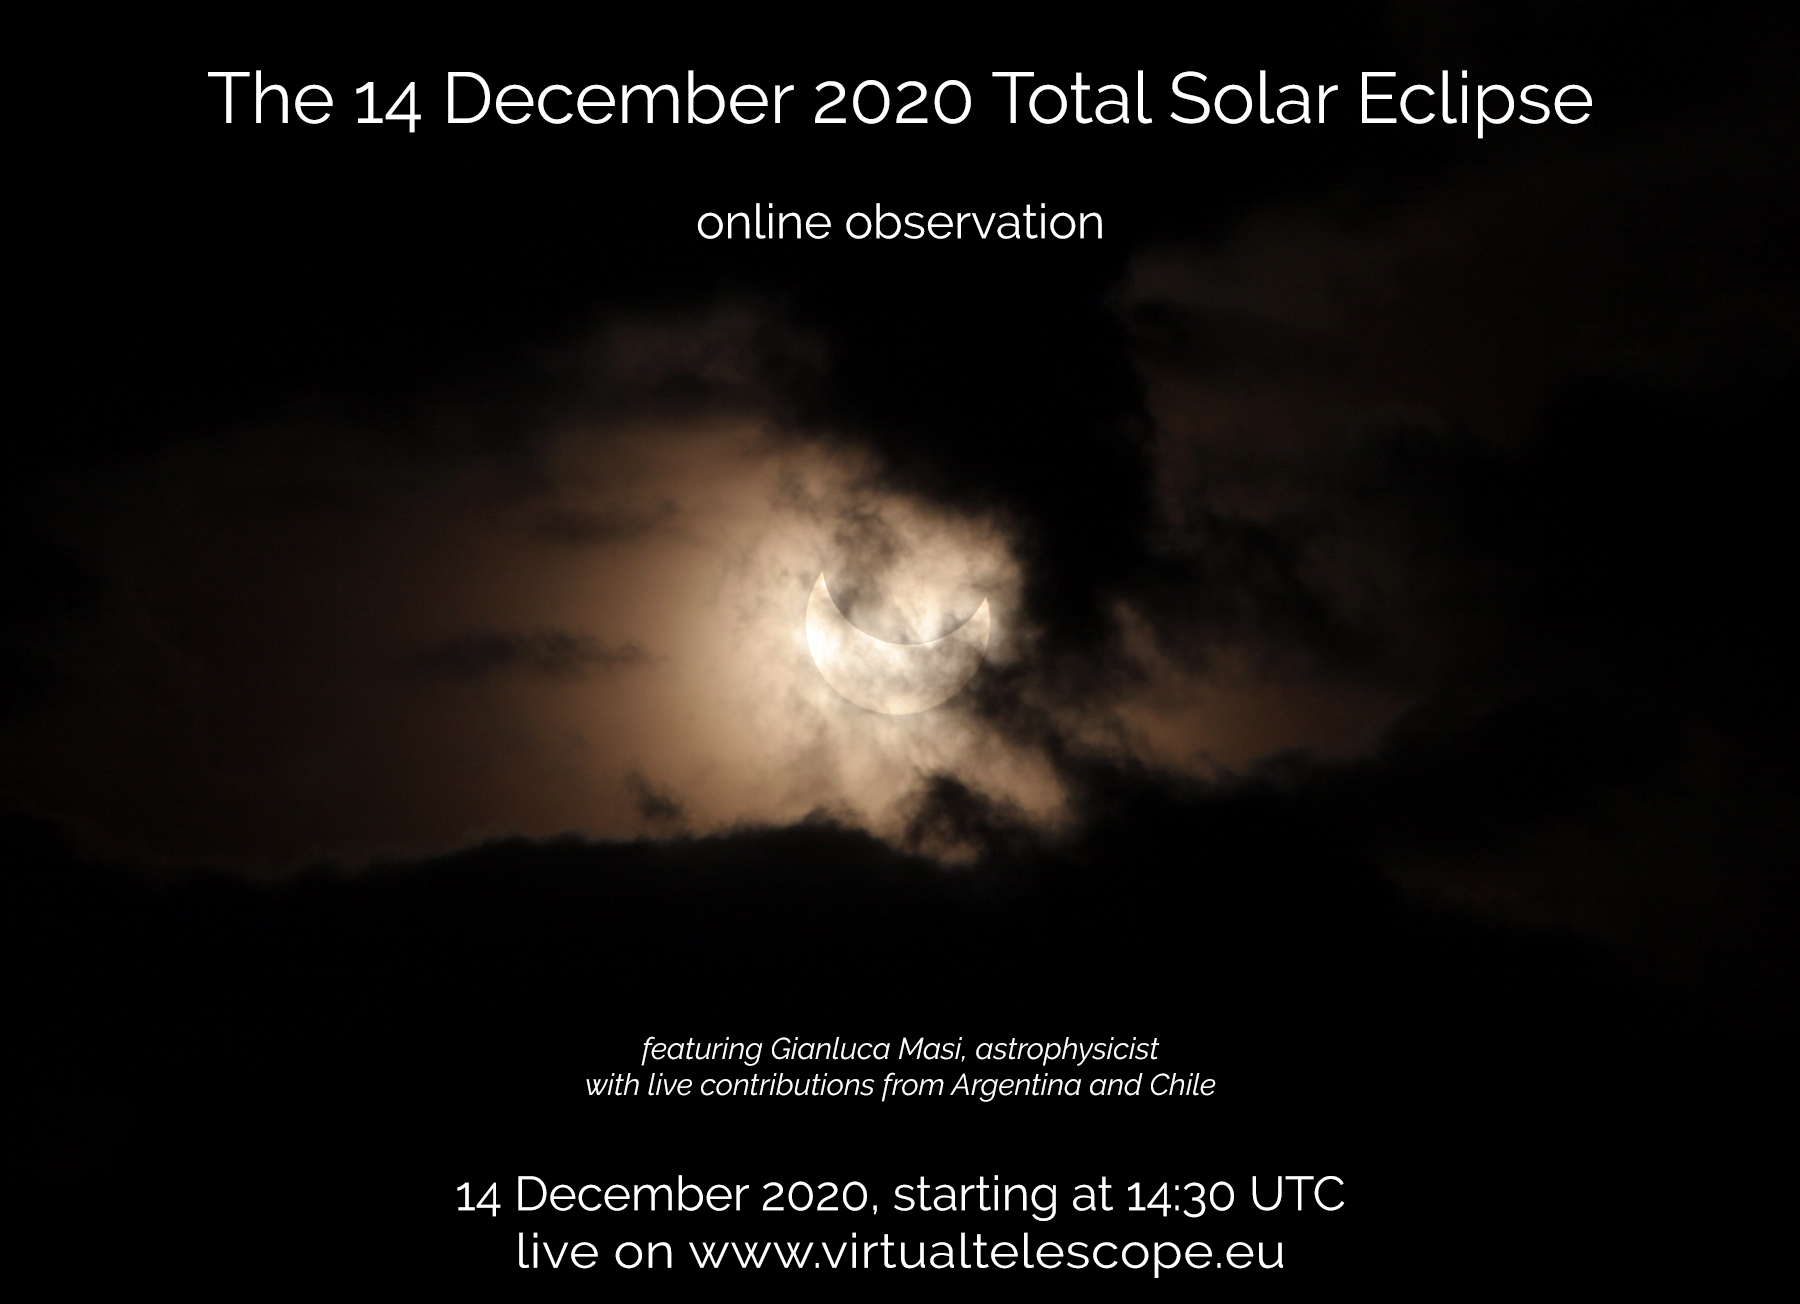 "14 December 2020 Total Solar Eclipse" - poster of the event